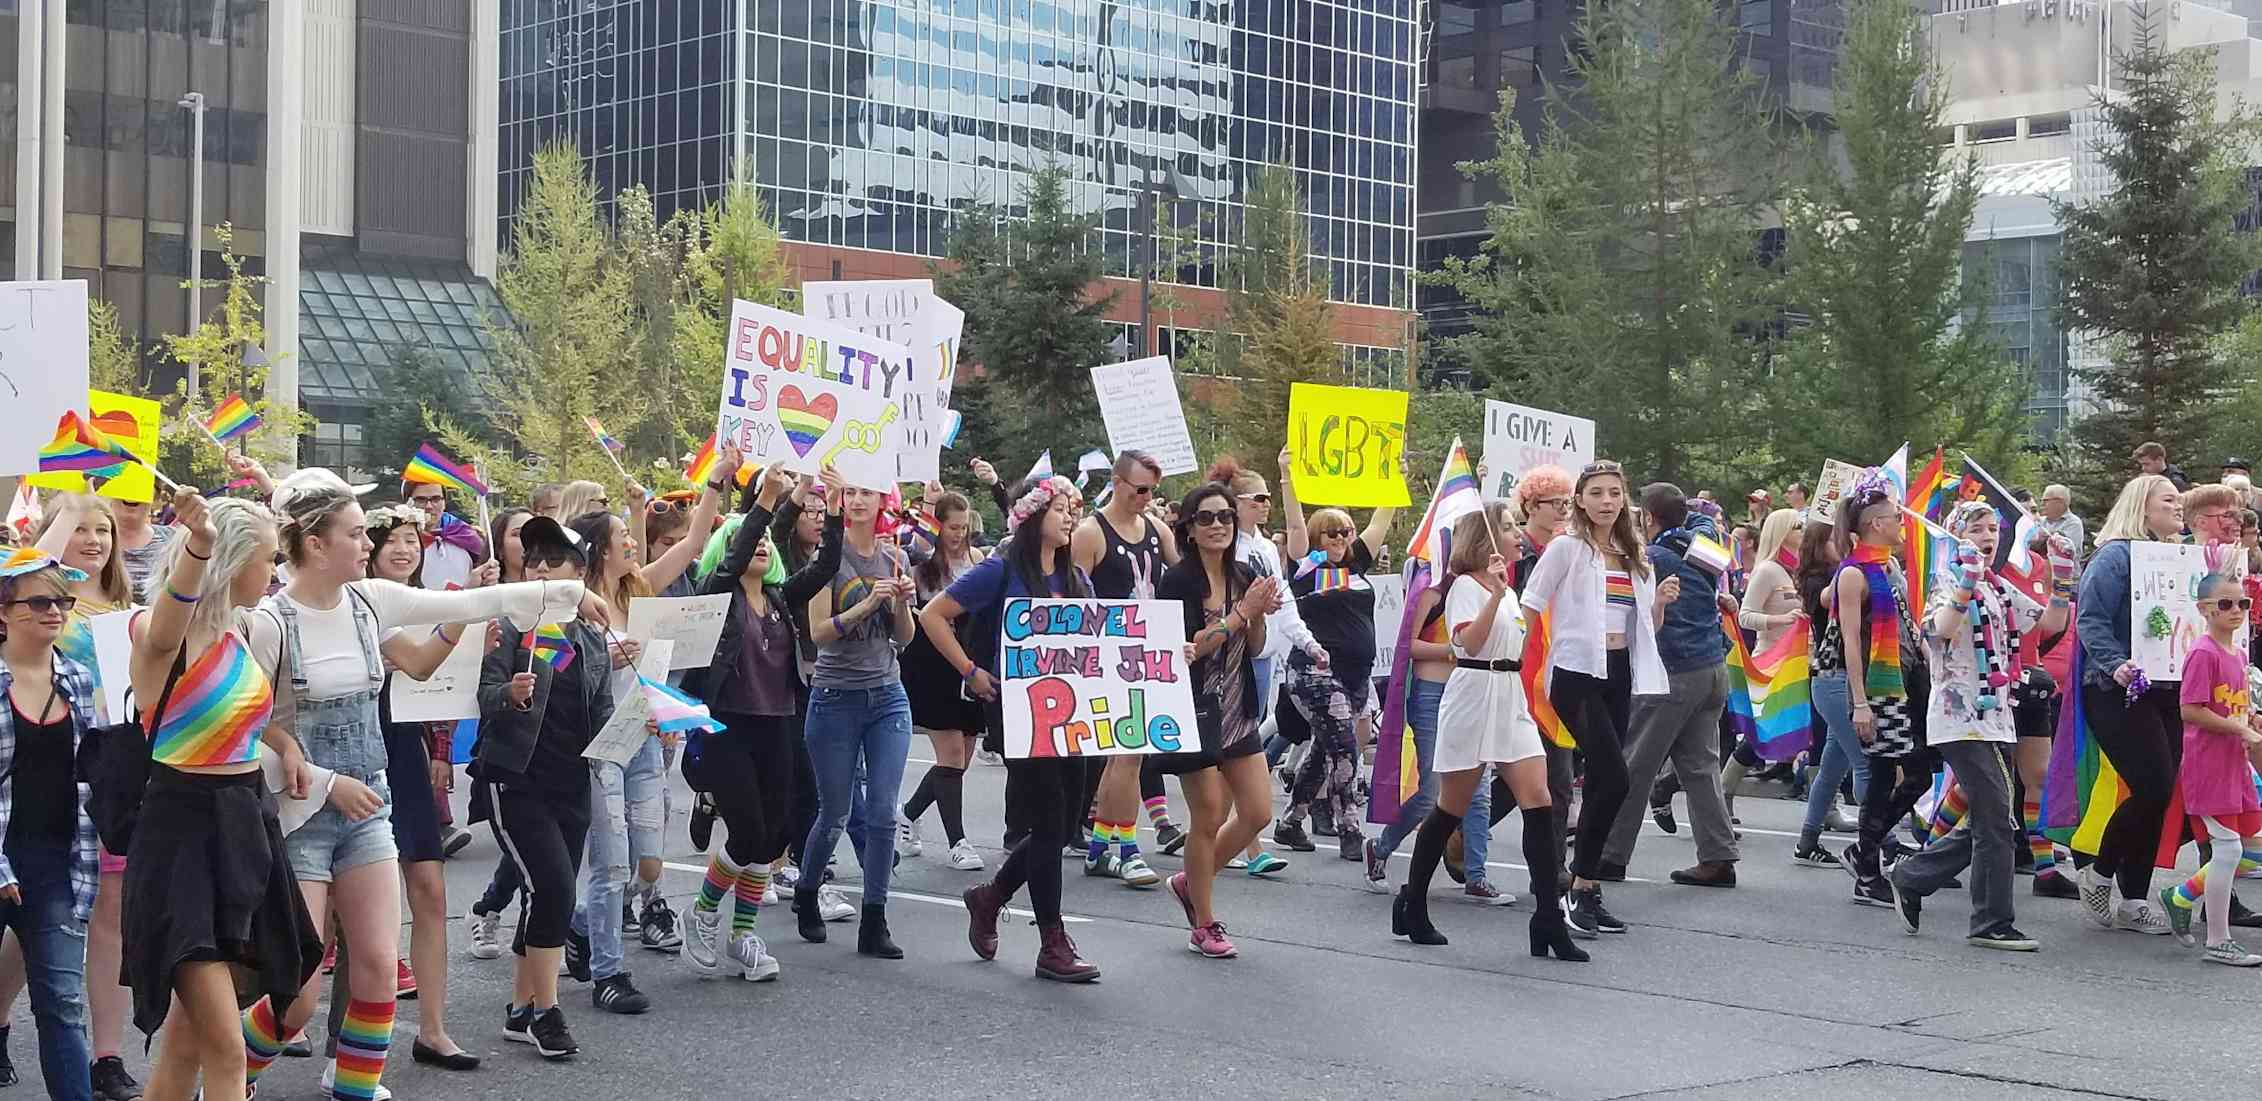 People march in a parade, some wearing rainbow clothing and carrying signs.